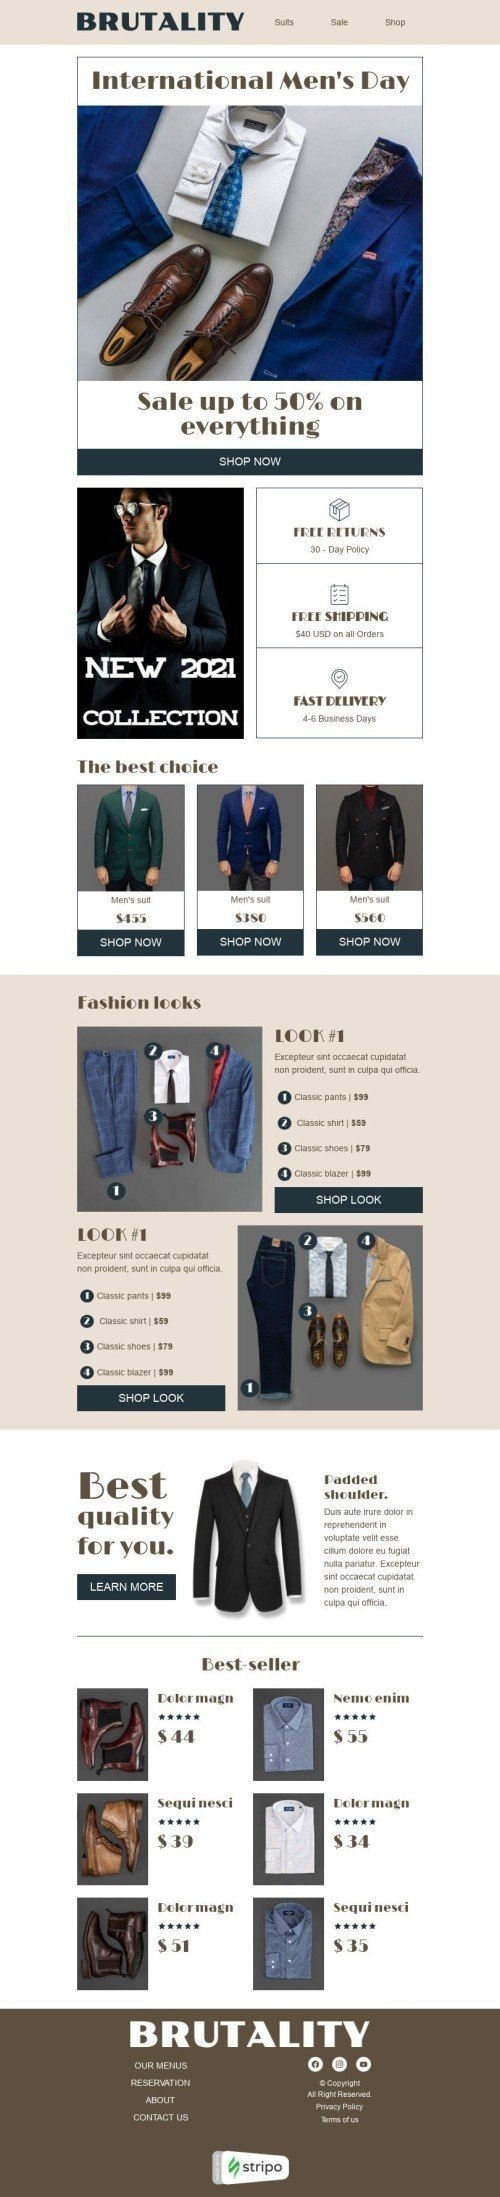 International Men's Day Email Template «Men's suits» for Fashion industry desktop view